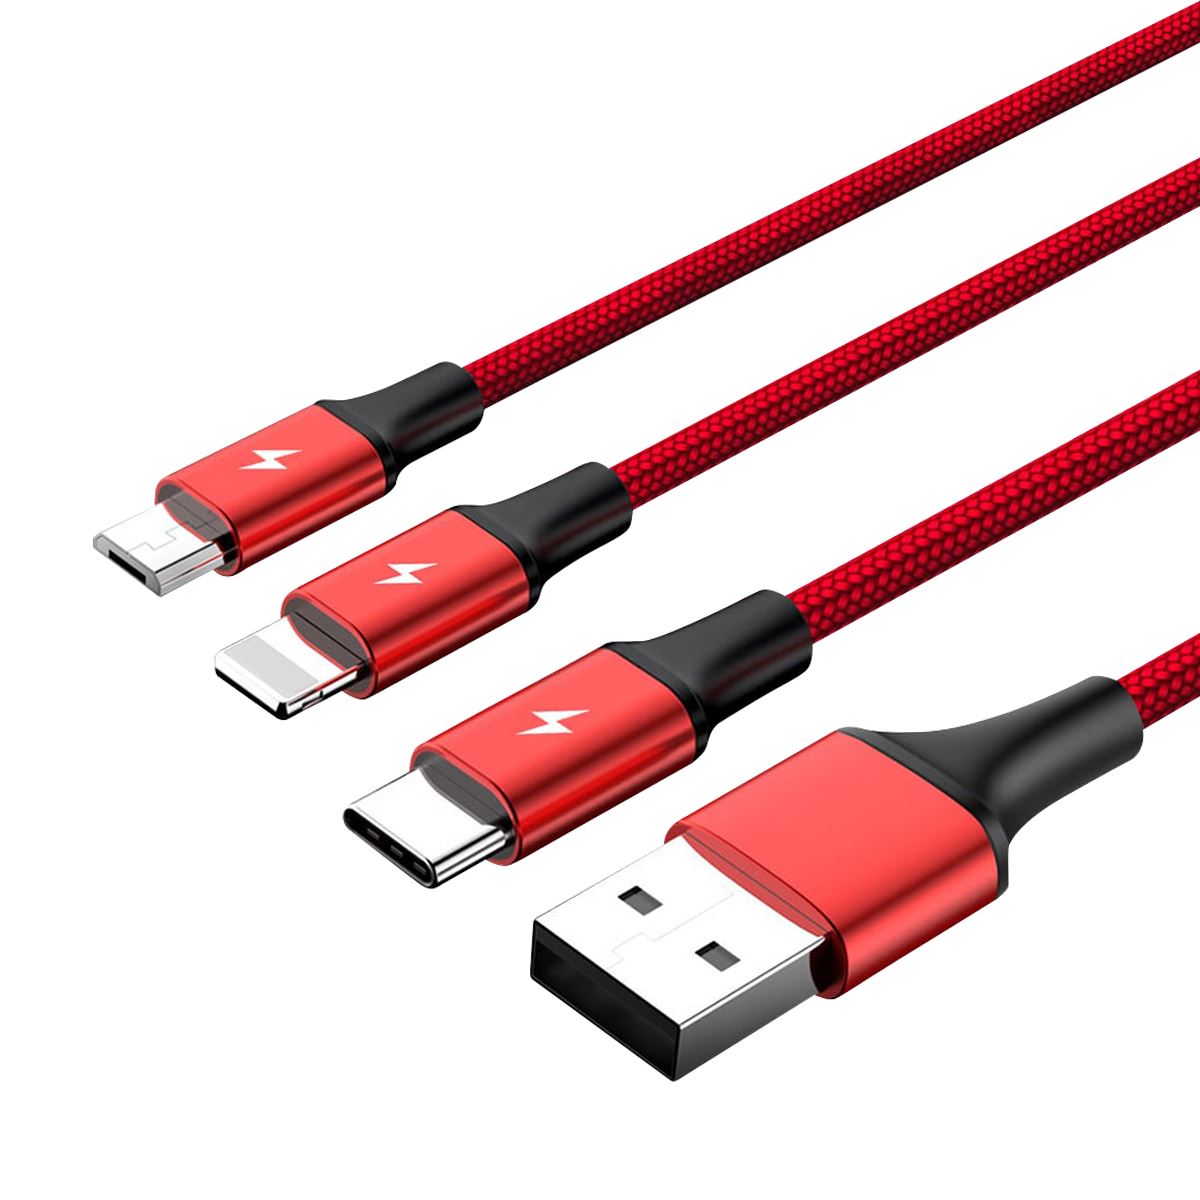 UNITEK 1.2m USB 3-in-1 Charge Cable. Integrated USB-A to Micro-B,